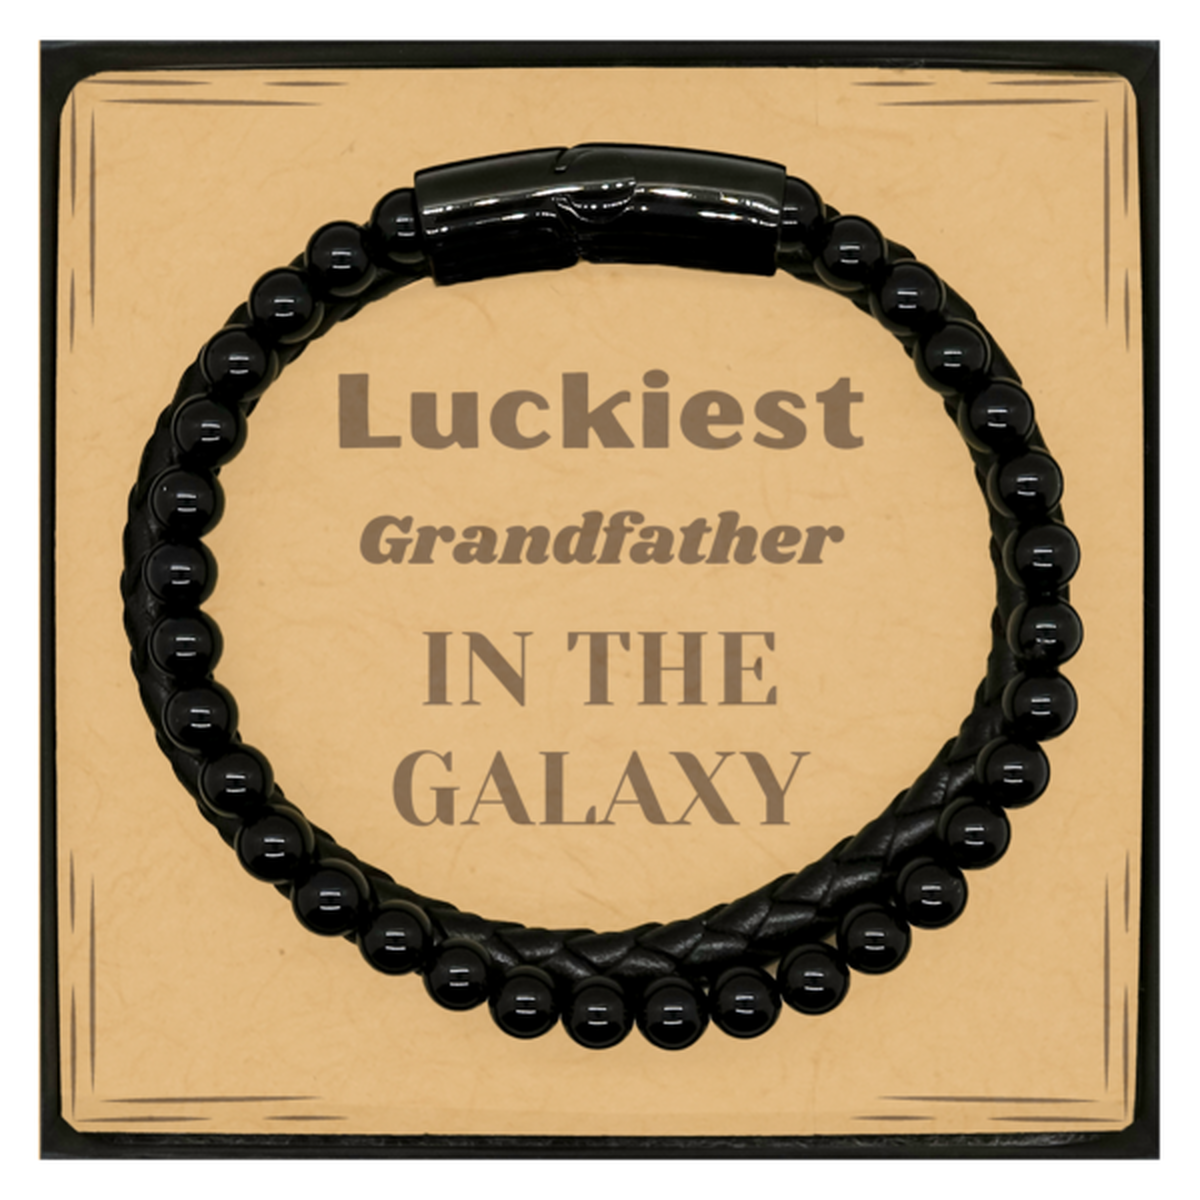 Luckiest Grandfather in the Galaxy, To My Grandfather Message Card Gifts, Christmas Grandfather Stone Leather Bracelets Gifts, X-mas Birthday Unique Gifts For Grandfather Men Women